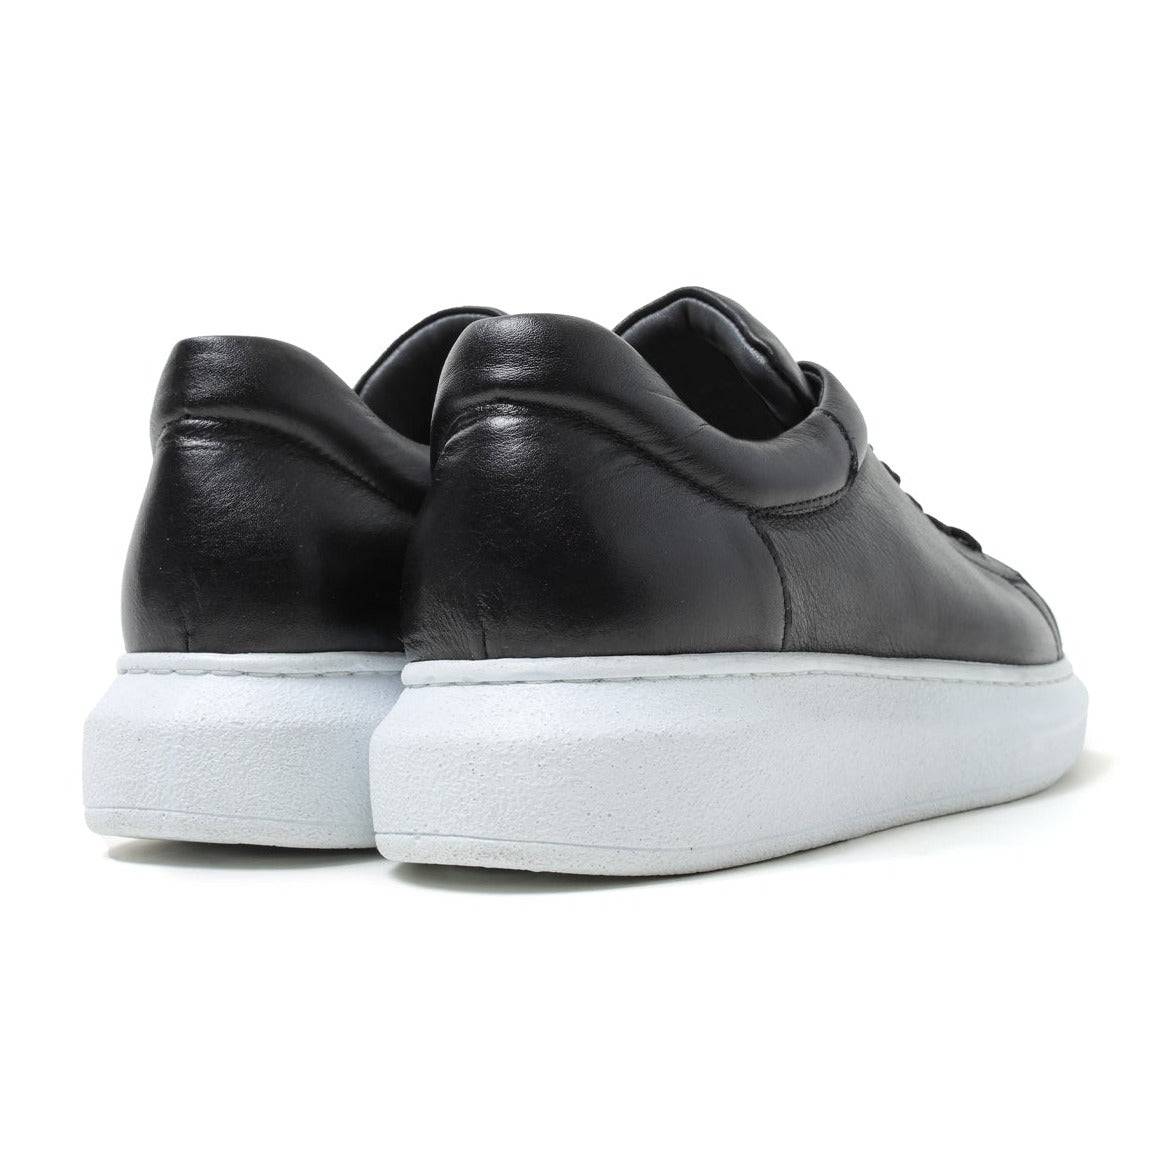 Low Top Casual Platform Sneakers for Women by Apollo Moda | Pluto Midnight Black